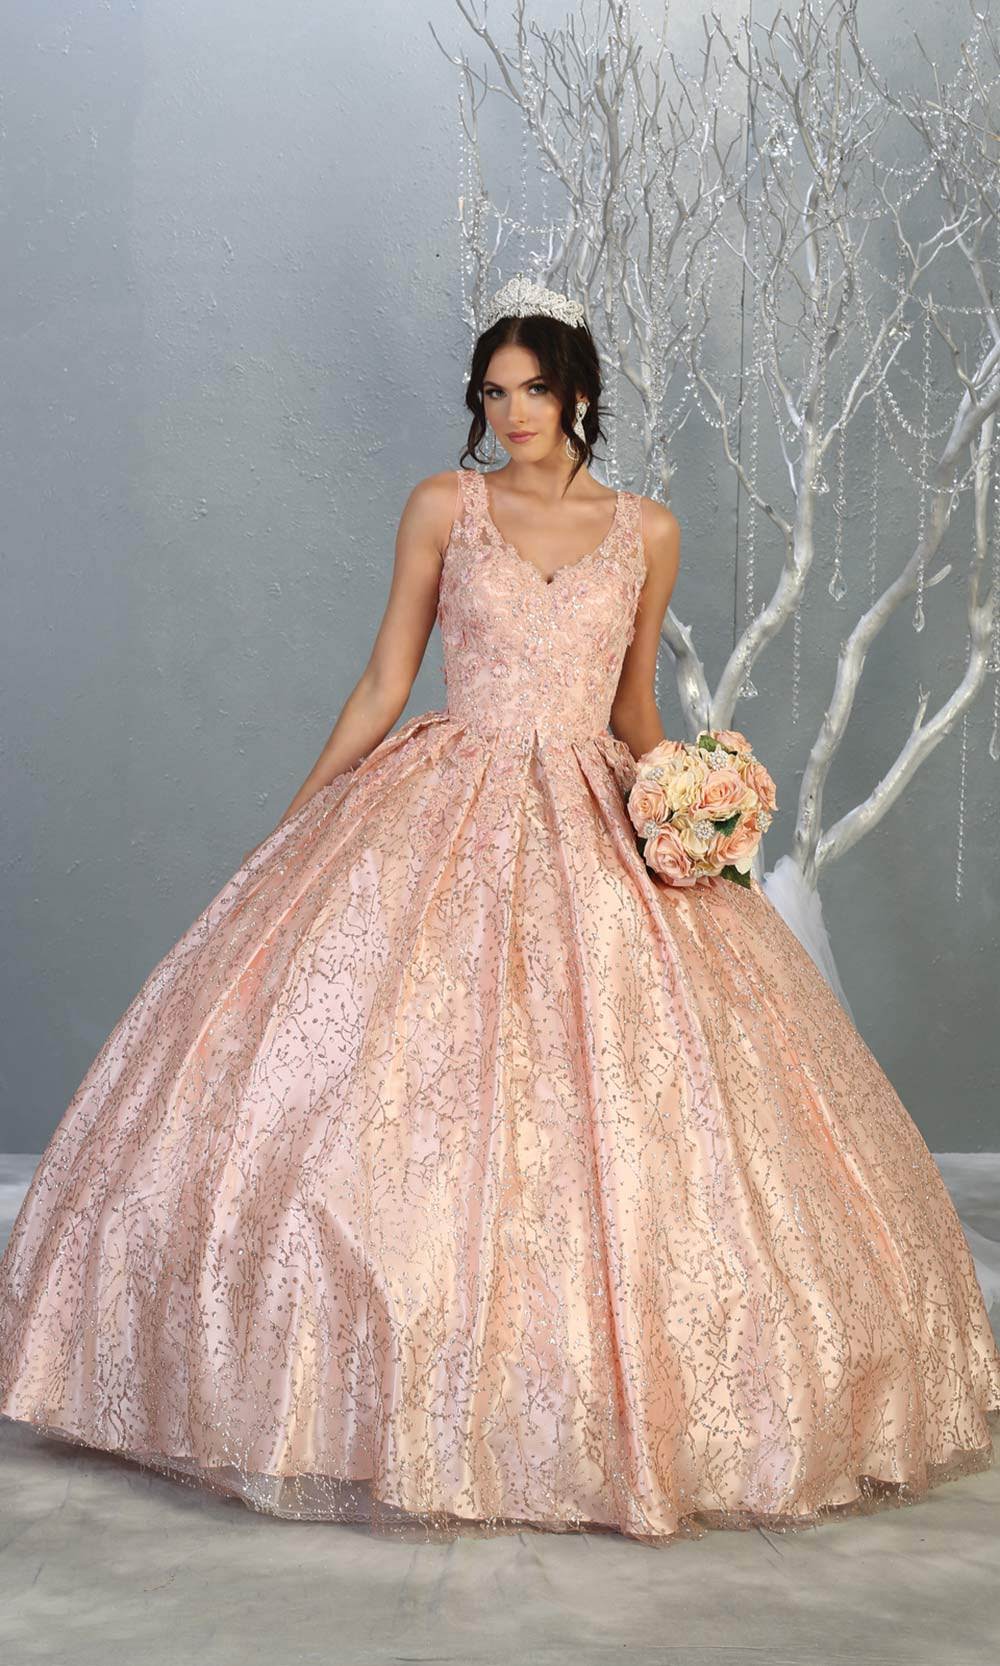 Mayqueen LK149 blush pink v neck quinceanera sequin ballgown w/strap. Light pink shiny ball gown is perfect for engagement dress, wedding reception, indowestern party gown, sweet 16, debut, sweet 15, sweet 18. Plus sizes available for pink ballgowns.jpg